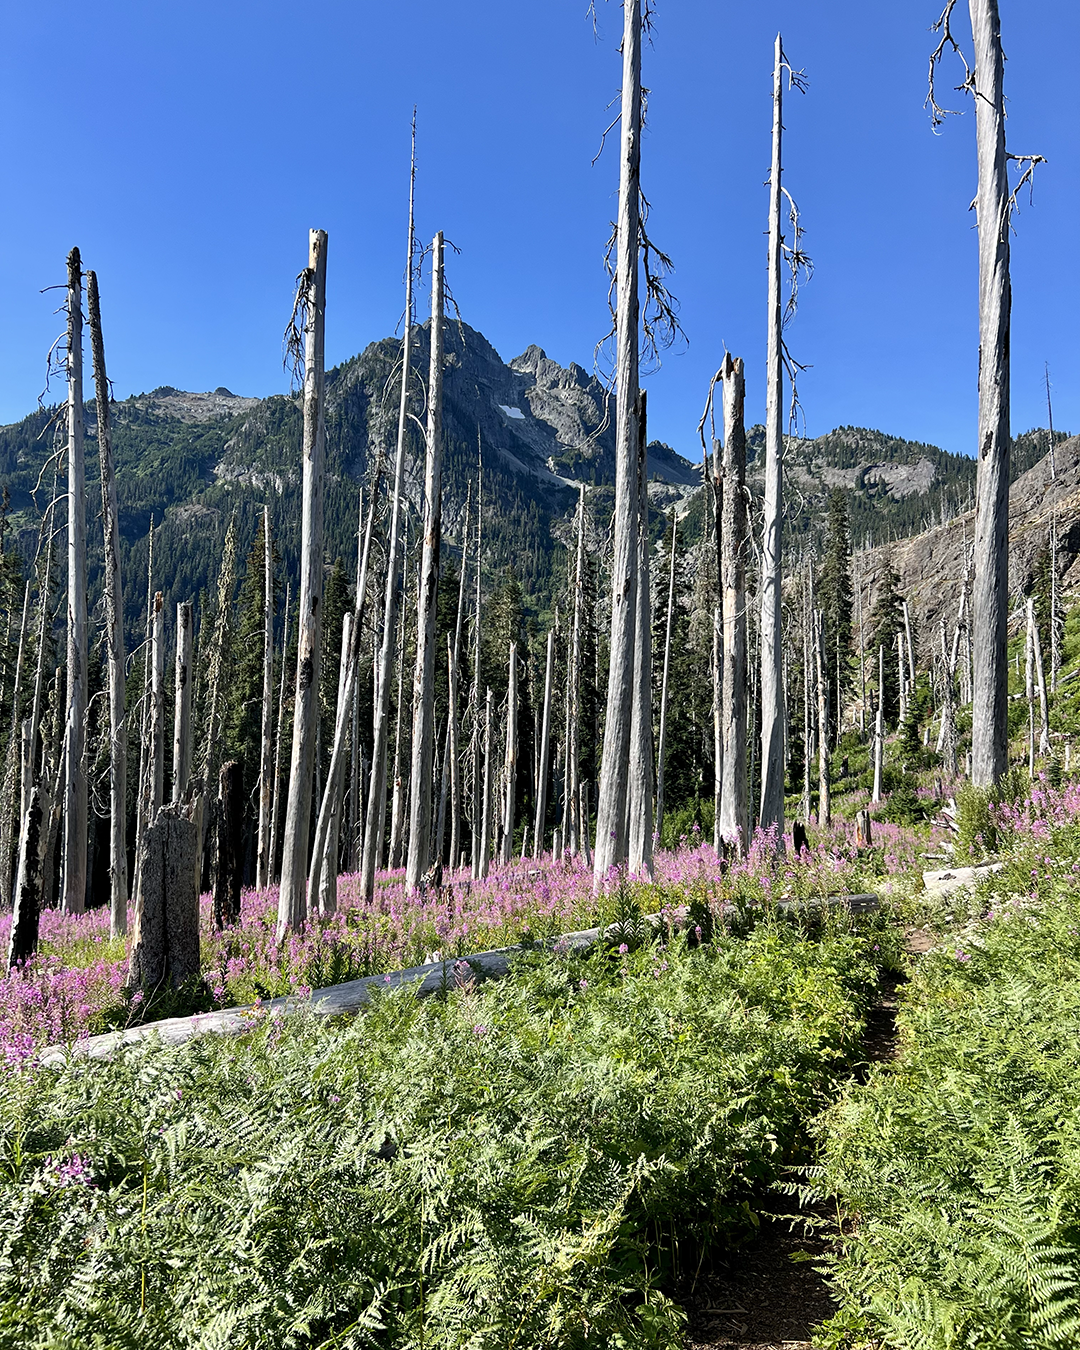  Hiking through one of the old burn sections, which was covered in fireweed wildflowers.  